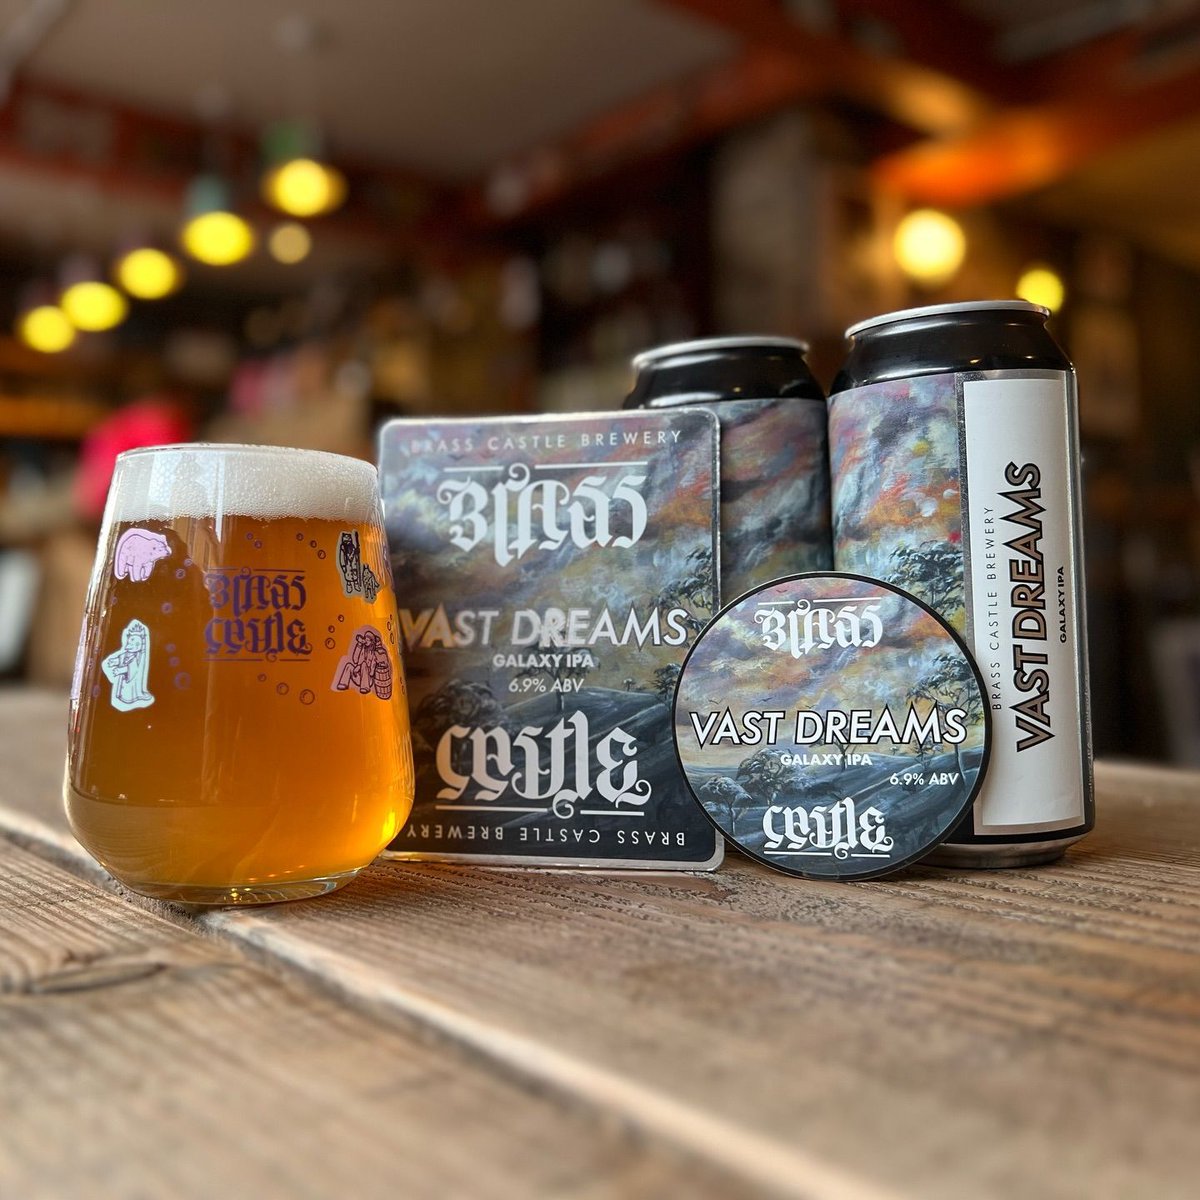 @BrassCastleBeer have landed at #JollyGoodBeer 🎉 Including the fantastic ‘Flux’, ‘Sunshine’ and ‘Vast Dreams’. Explore the full range here: buff.ly/3uRgHWW or contact our sales team for more information. #IPA #Beer #JollyGoodBeer #BrassCastle